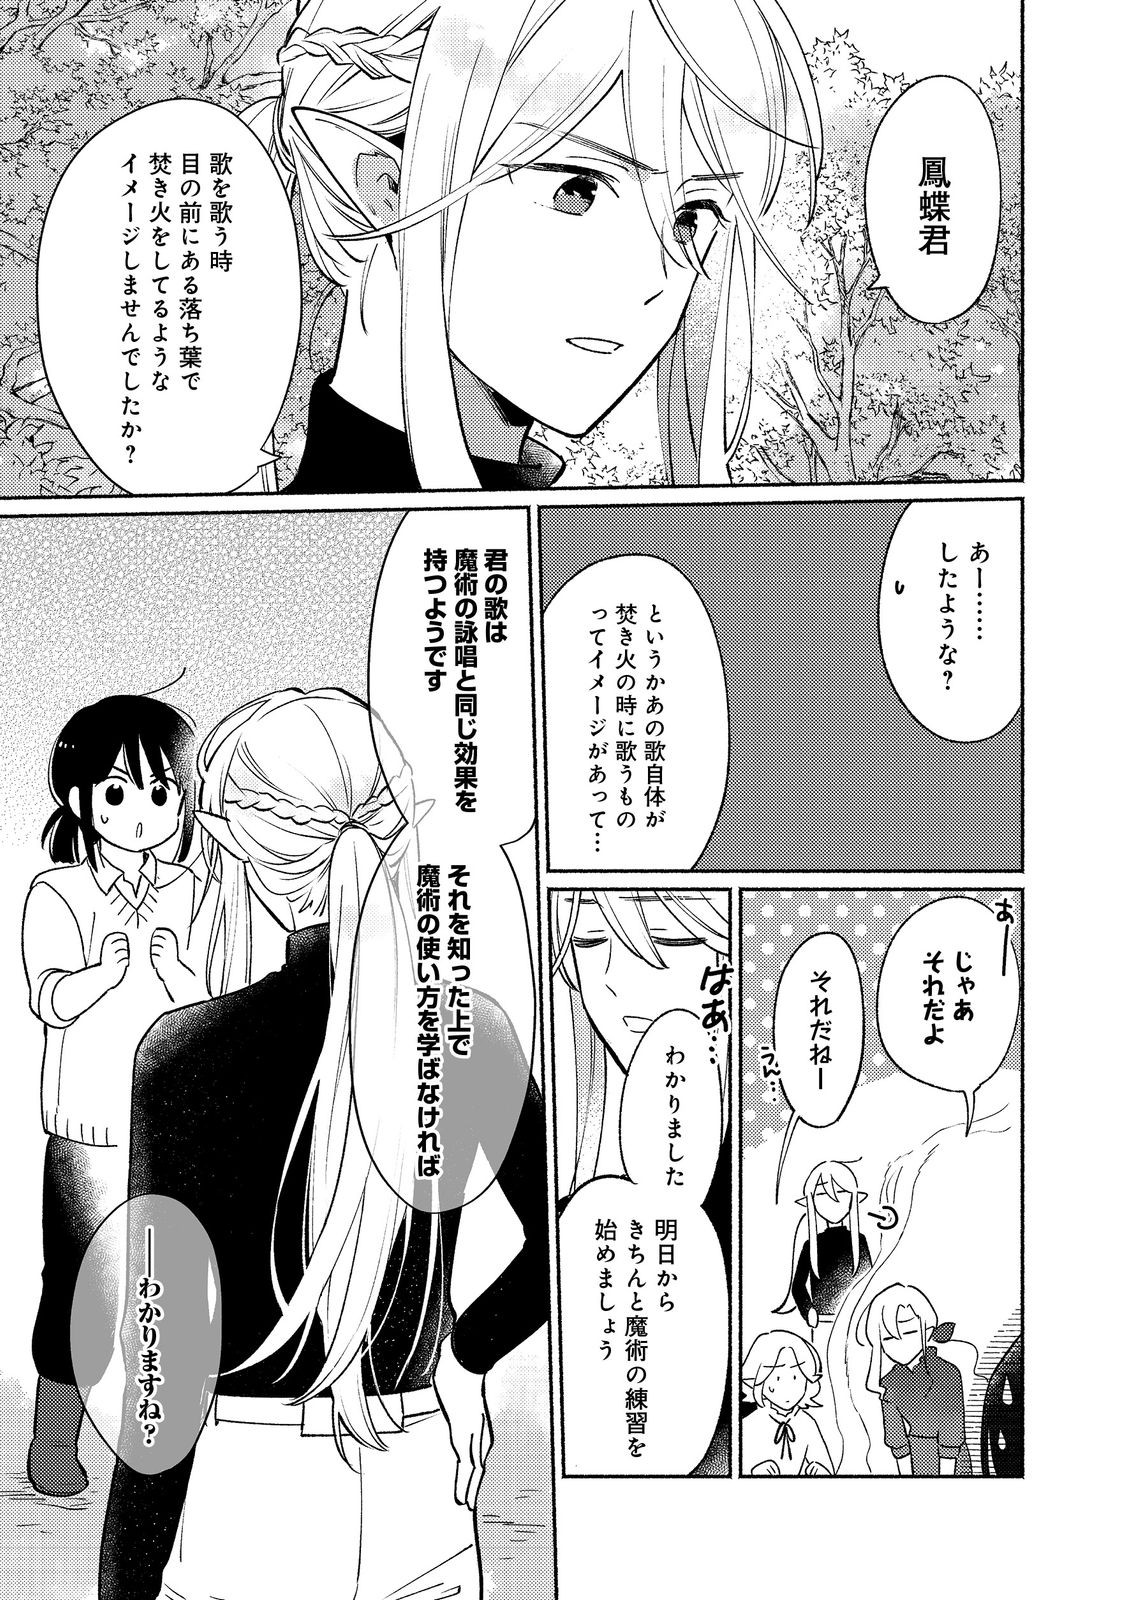 I’m the White Pig Nobleman 第18.2話 - Page 8